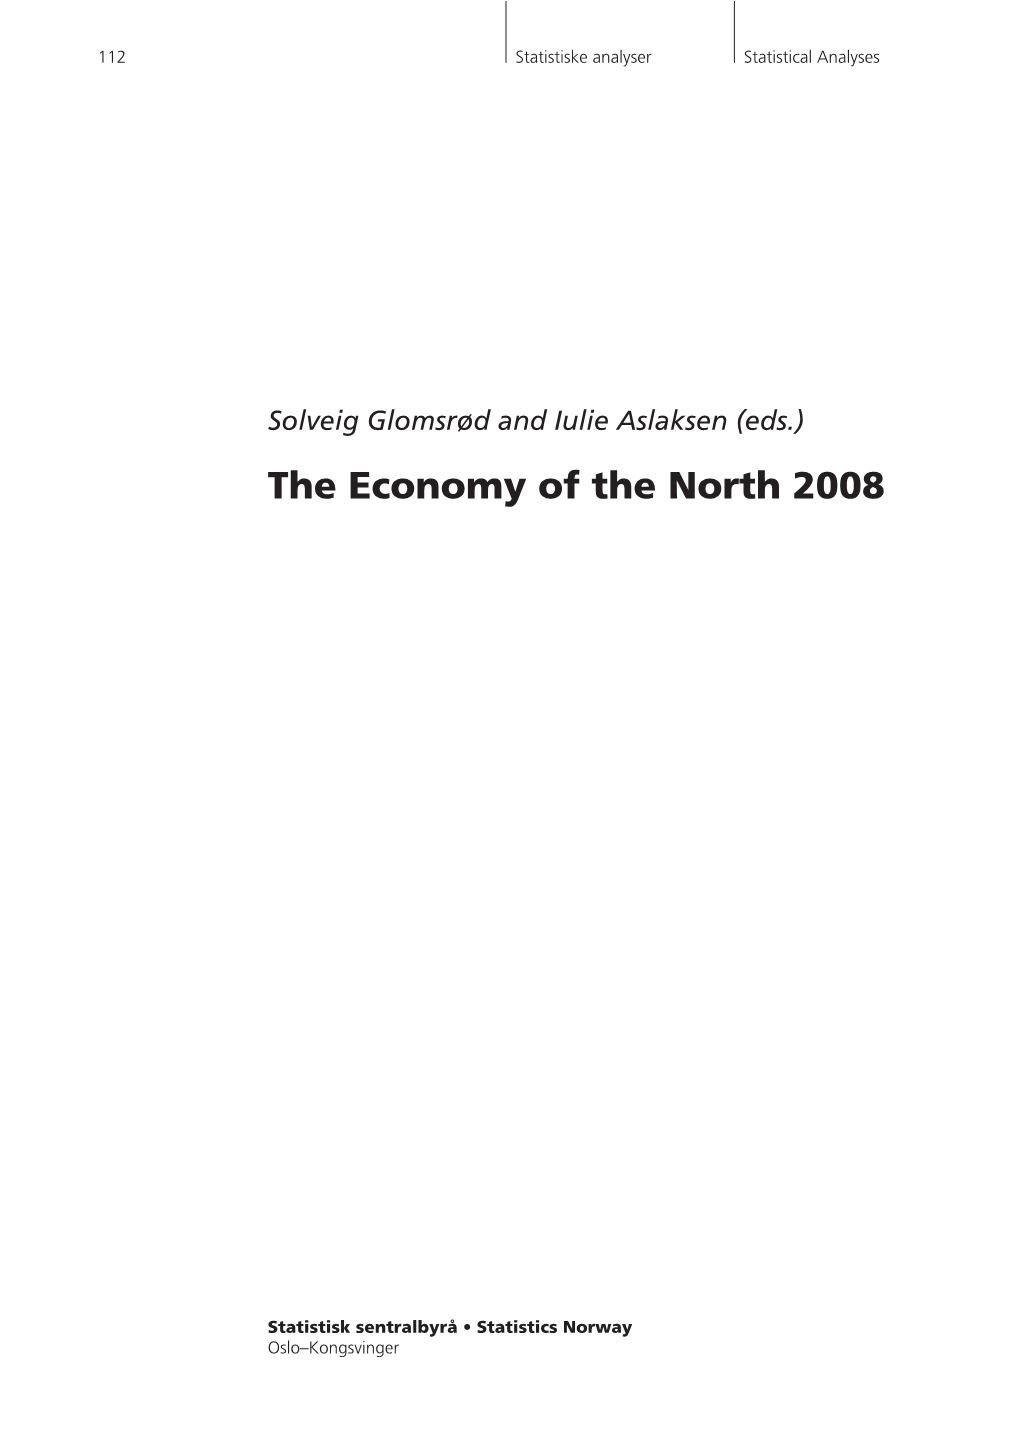 (Eds.) the Economy of the North 2008